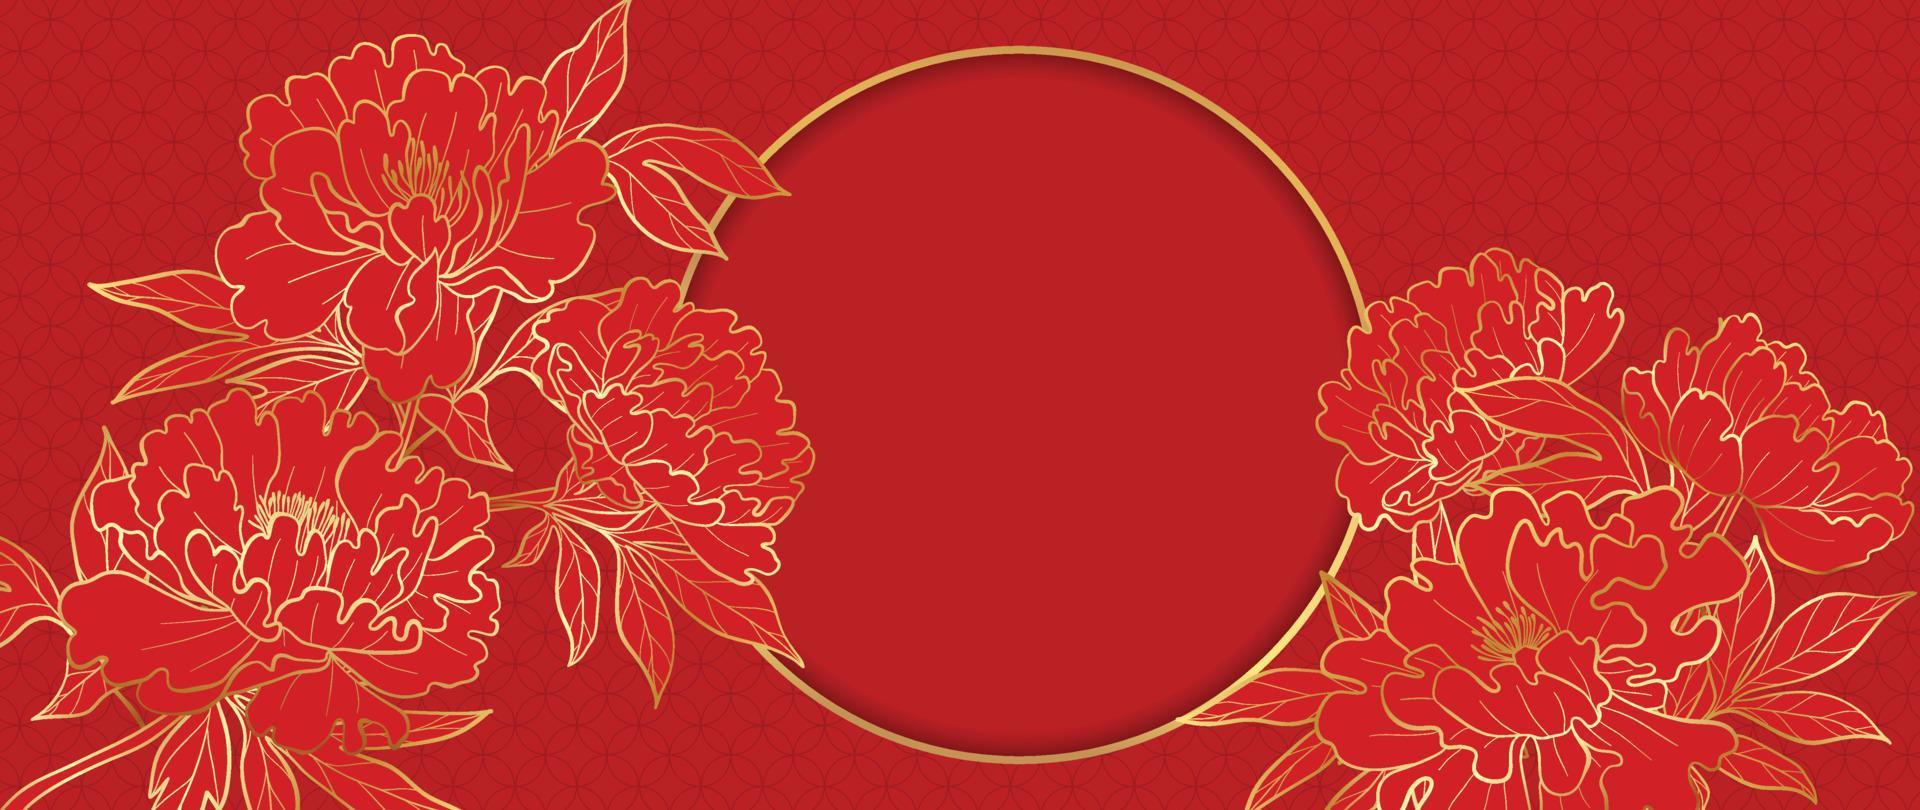 Happy Chinese new year luxury style pattern background vector. Peony flower golden line art and circle frame on red background. Design illustration for wallpaper, card, poster, packaging, advertising. vector